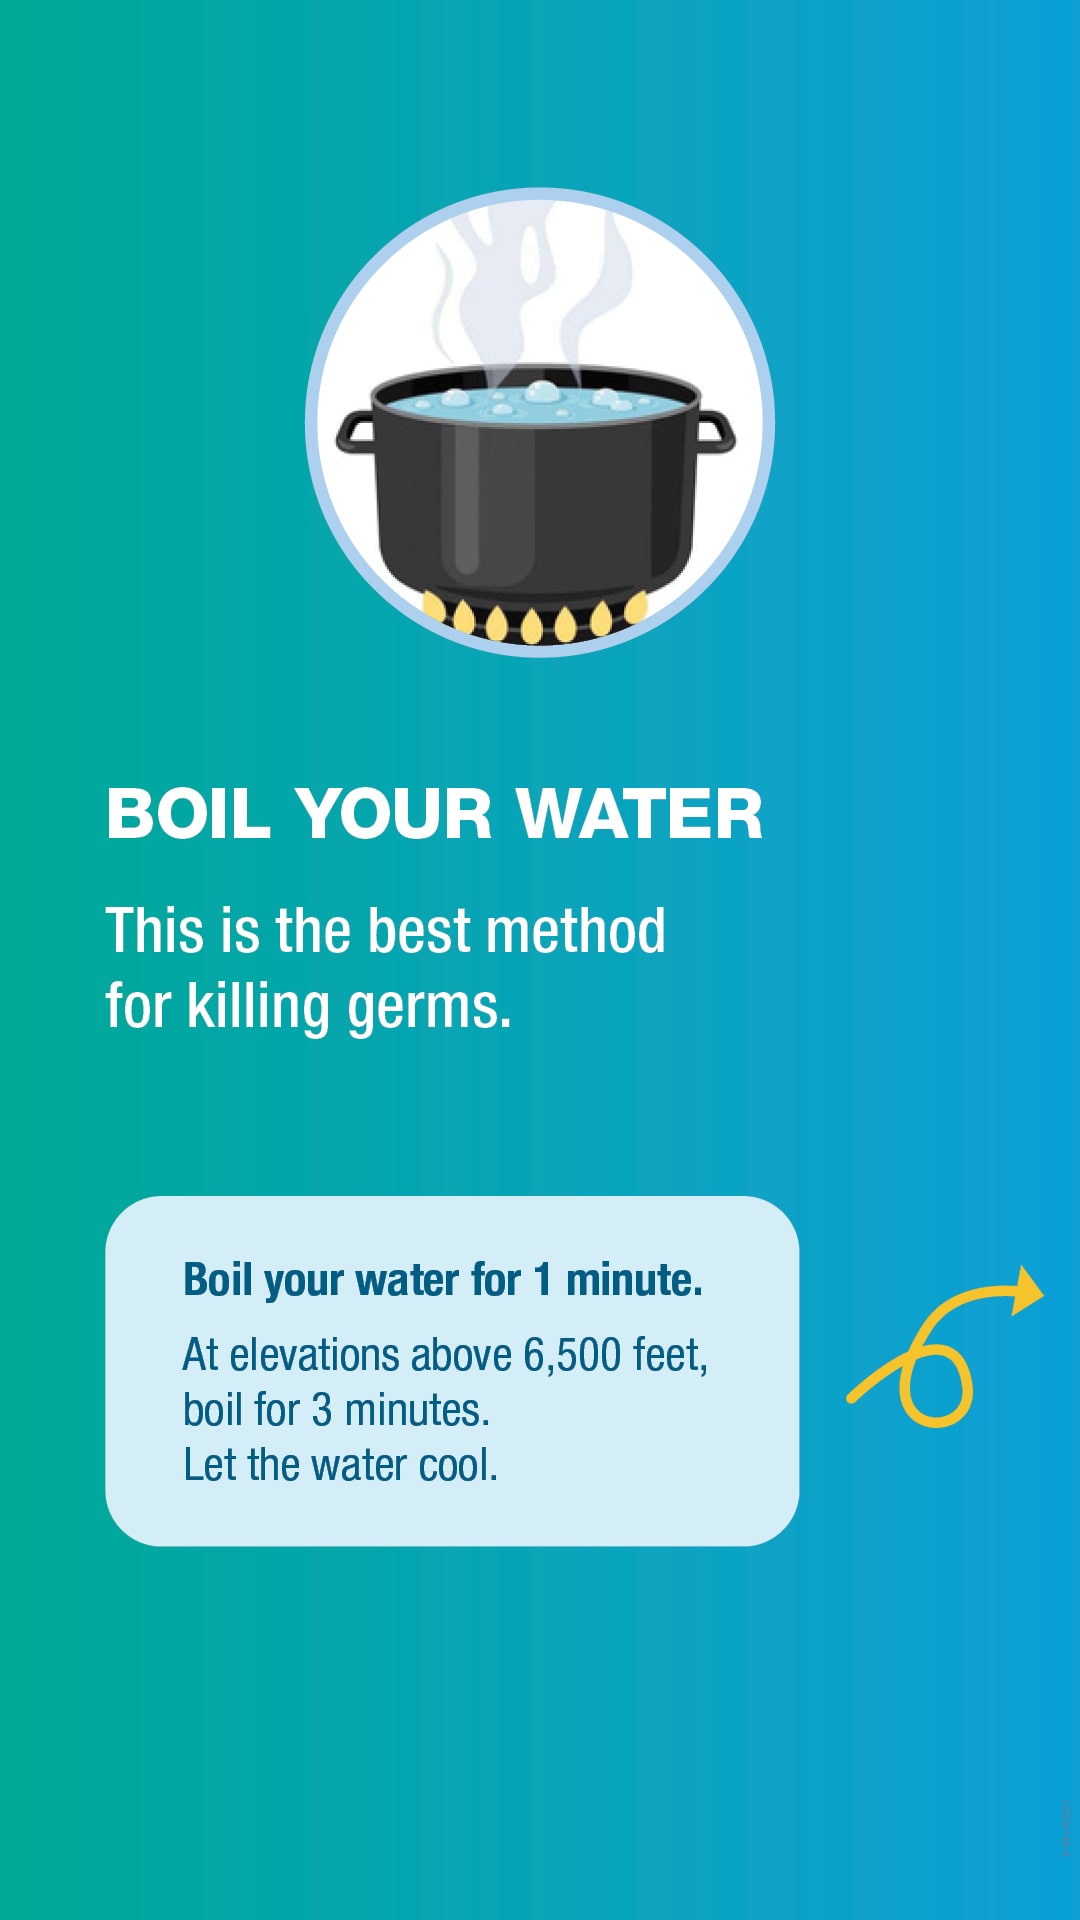 Make Water Safe: Boil Your Water - for Facebook